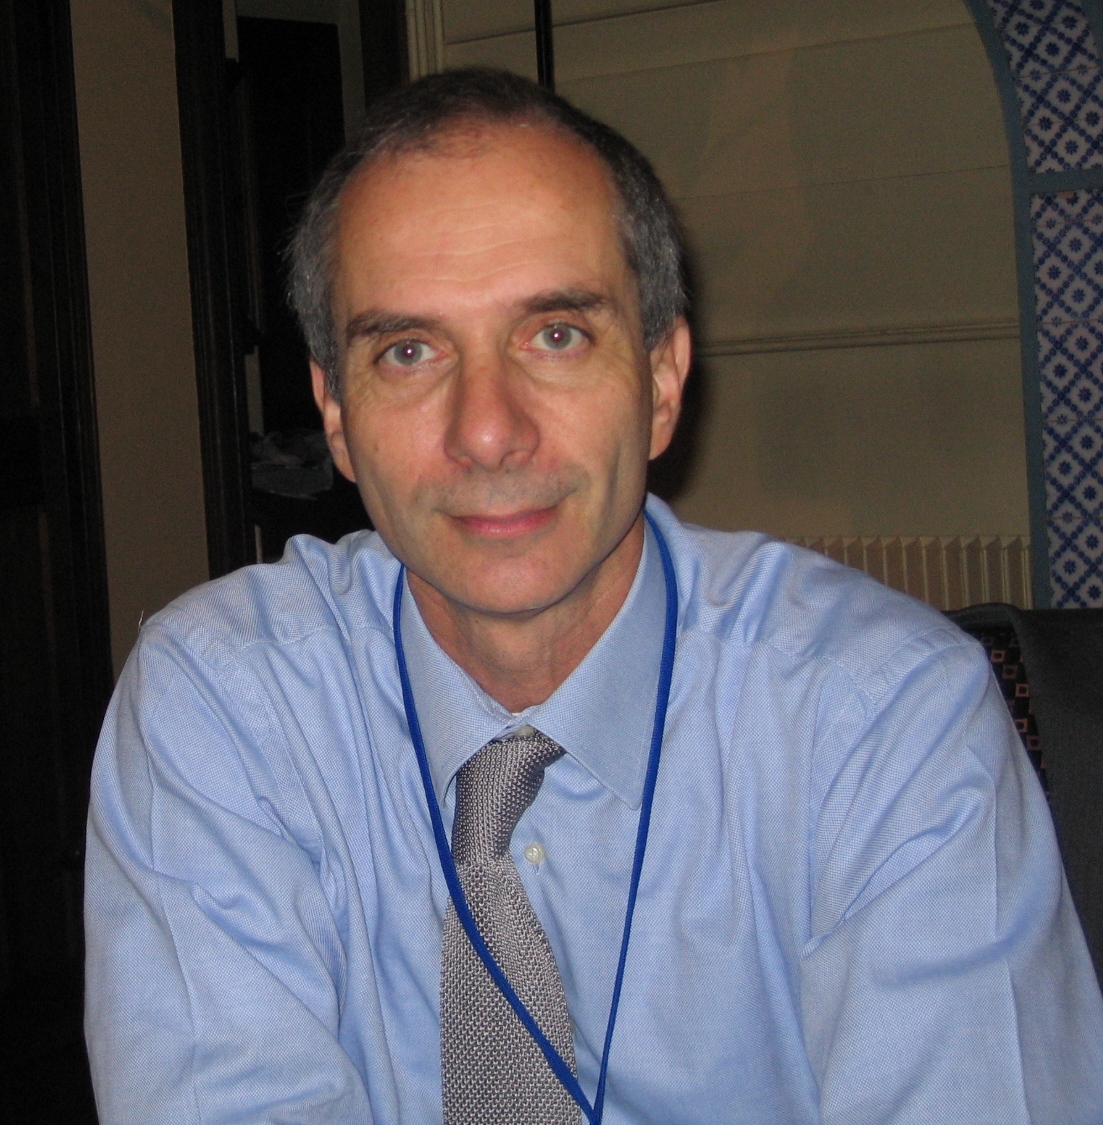 La parola a... Gianni Inzerillo - Airbus Defence & Space, Project Manager SESAR Industrial Support